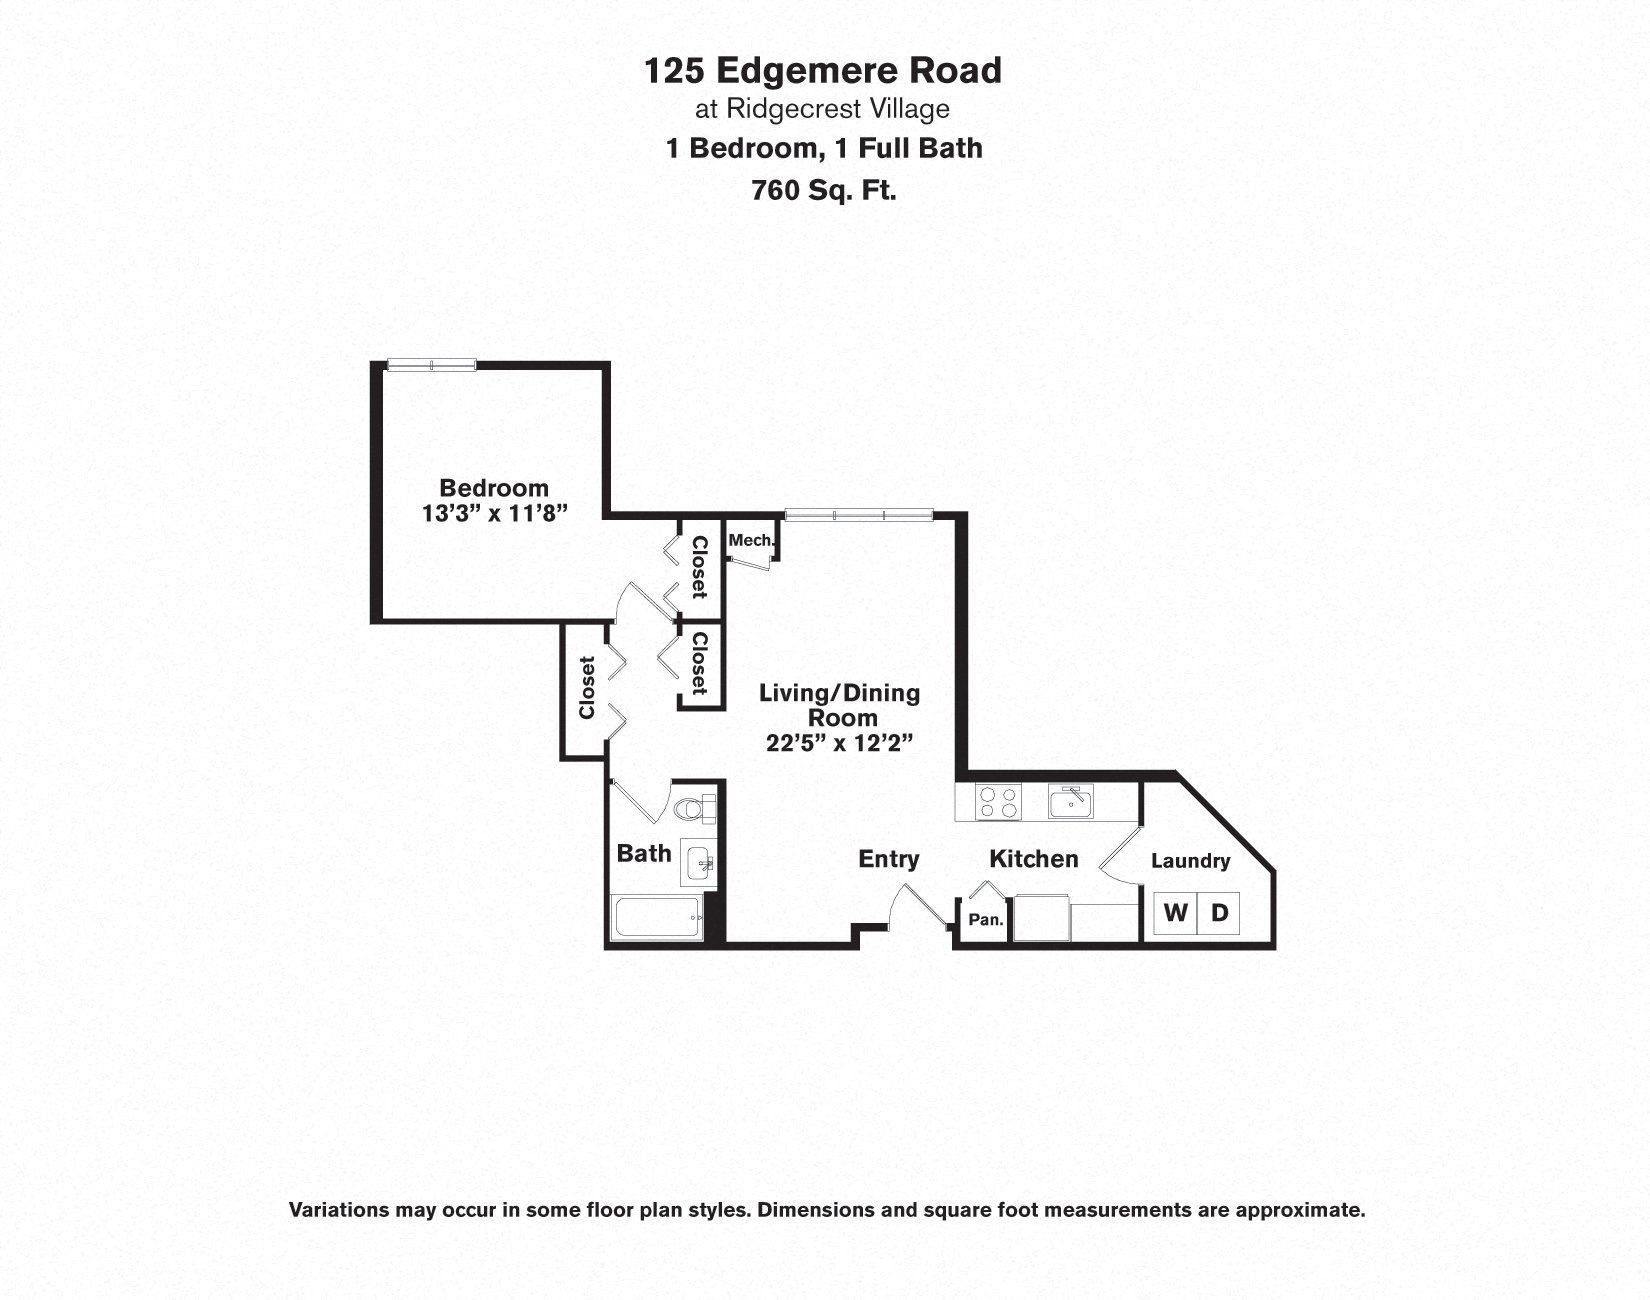 Click to view Floor plan 1 Bed/1 Bath - Edgemere image 1